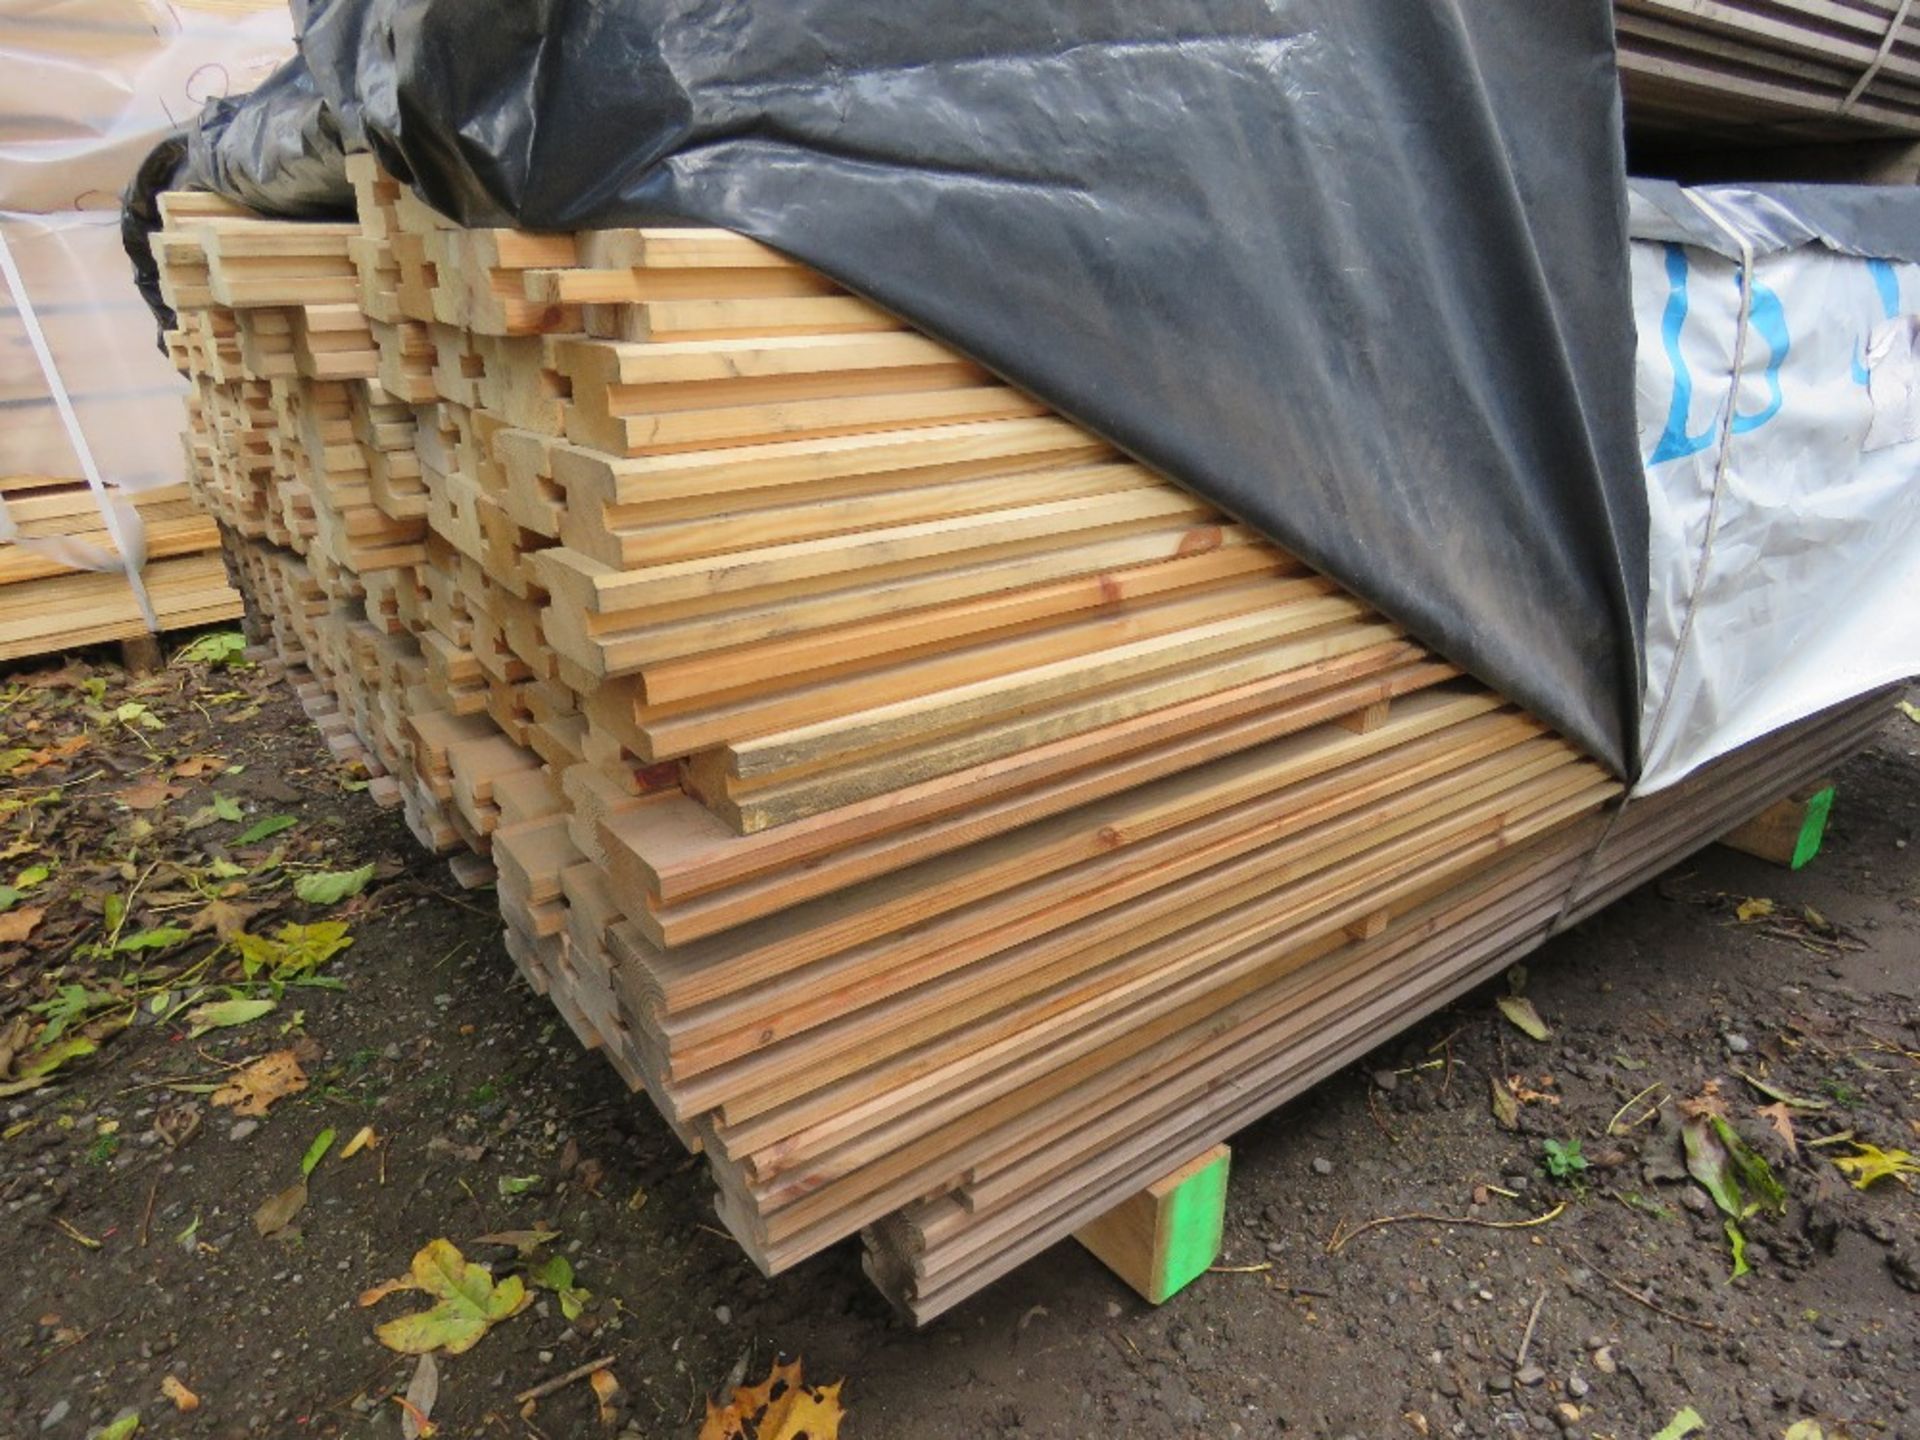 PACK OF H SECTIONED CONSTRUCTION TIMBER, UNTREATED. SIZE: 1.70M LENGTH X 55MM WIDE X 35MM DEPTH APPR - Image 3 of 3